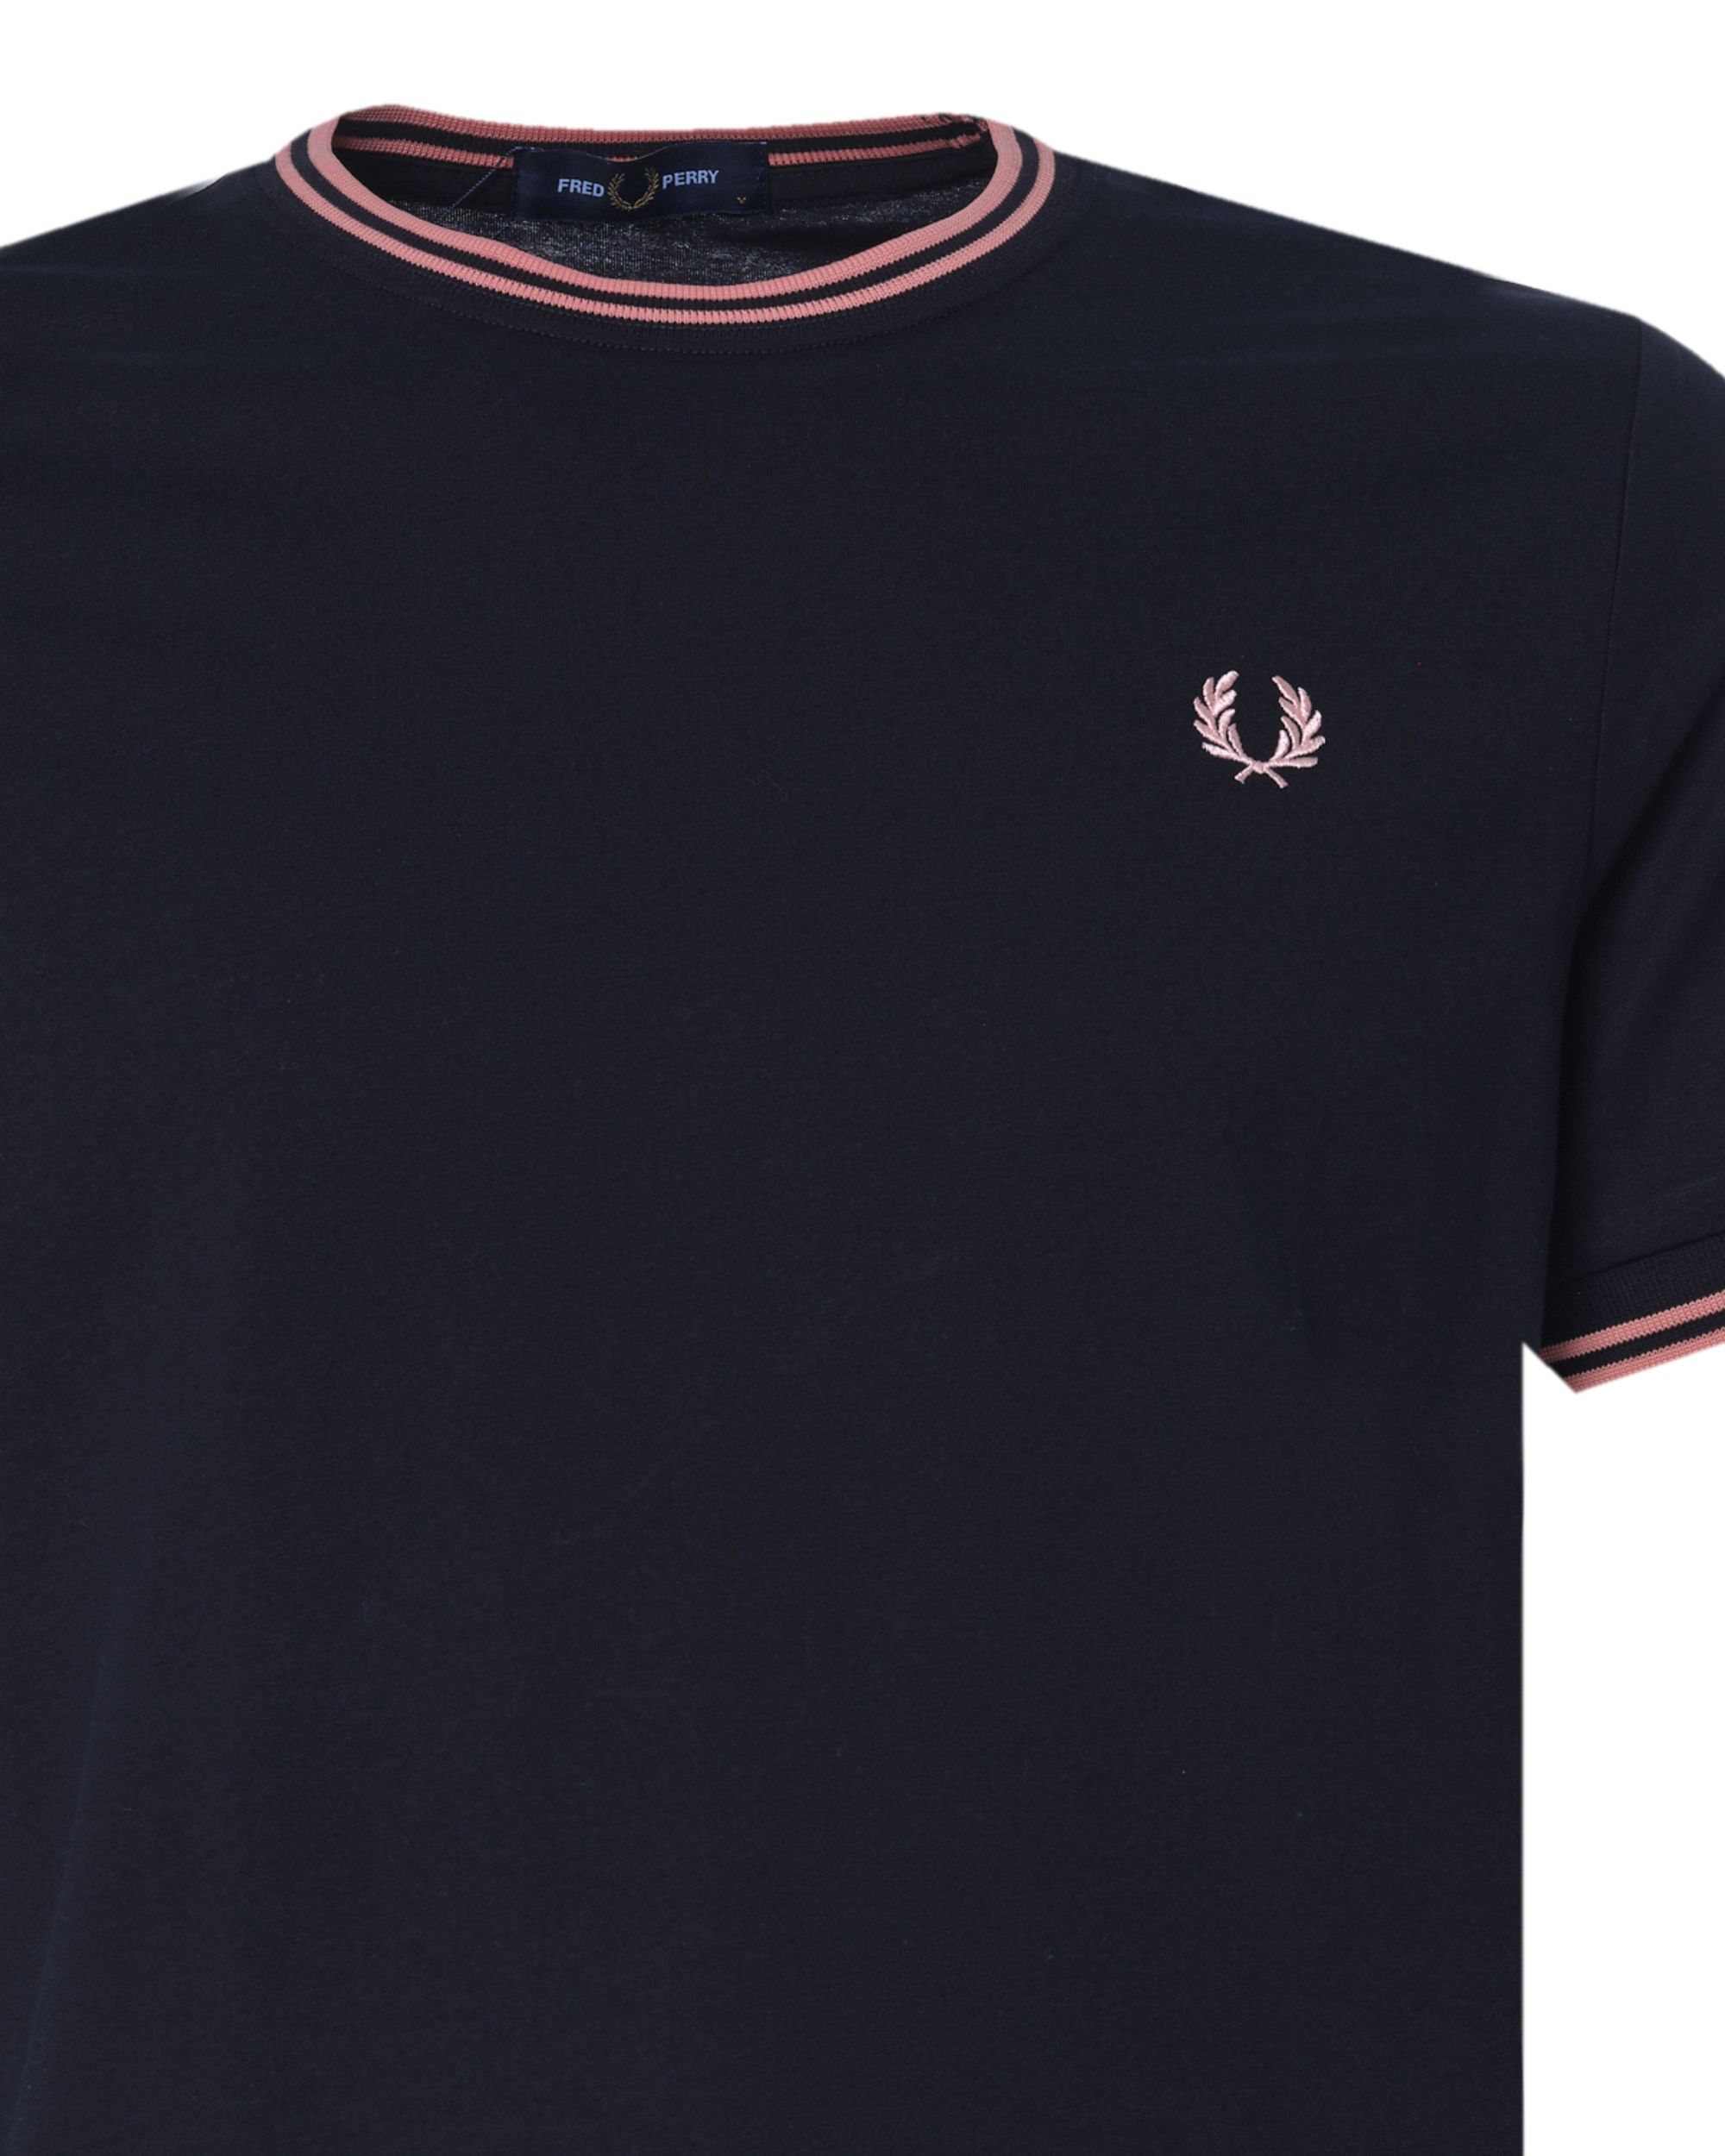 Fred Perry Twin Tipped T-shirt KM Zwart 078790-001-L